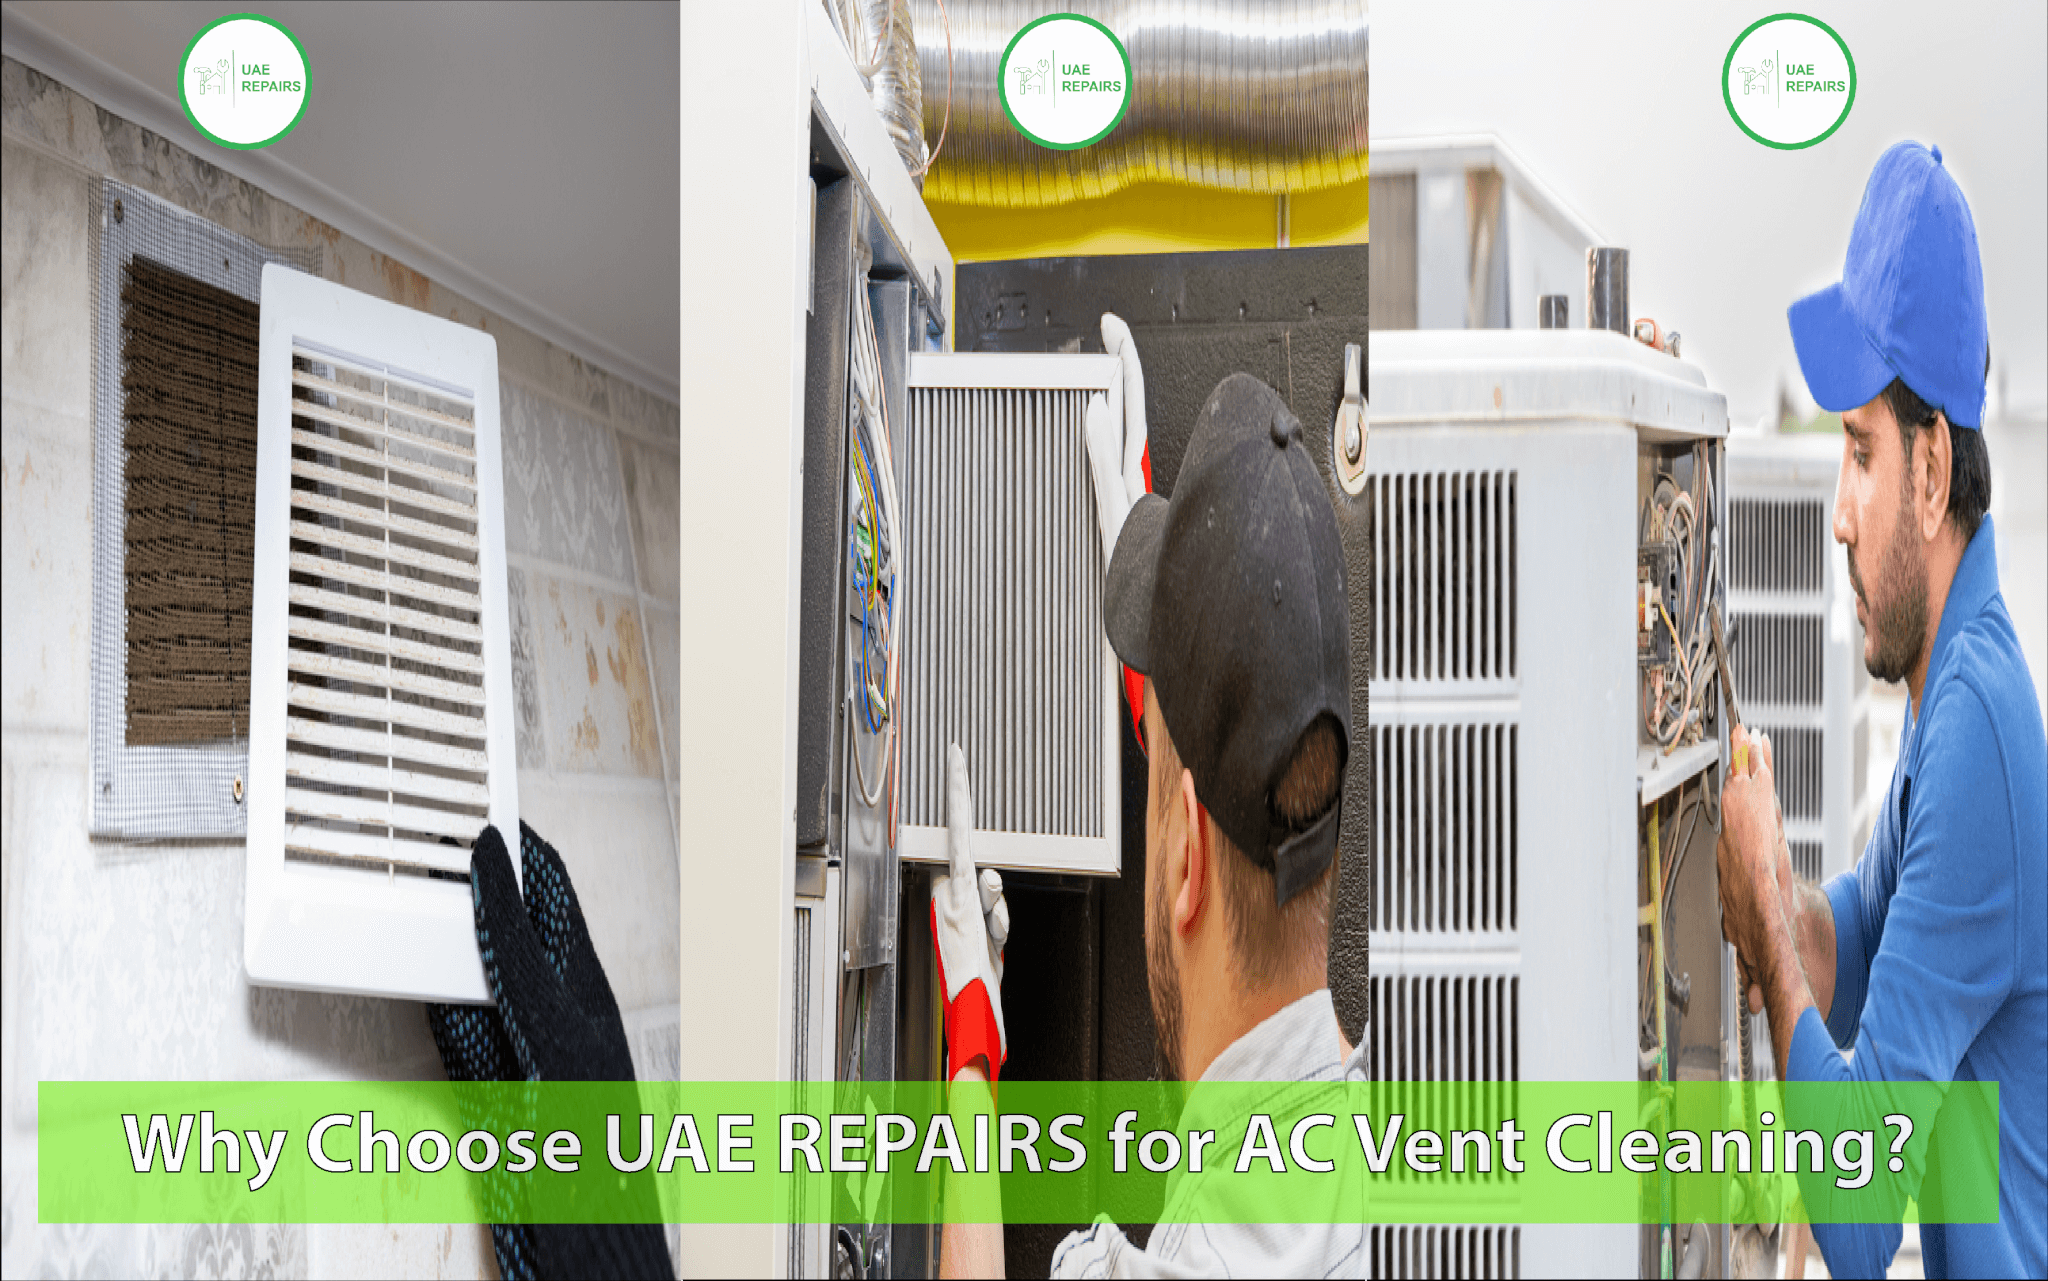 Why Choose UAE REPAIRS for AC Vent Cleaning